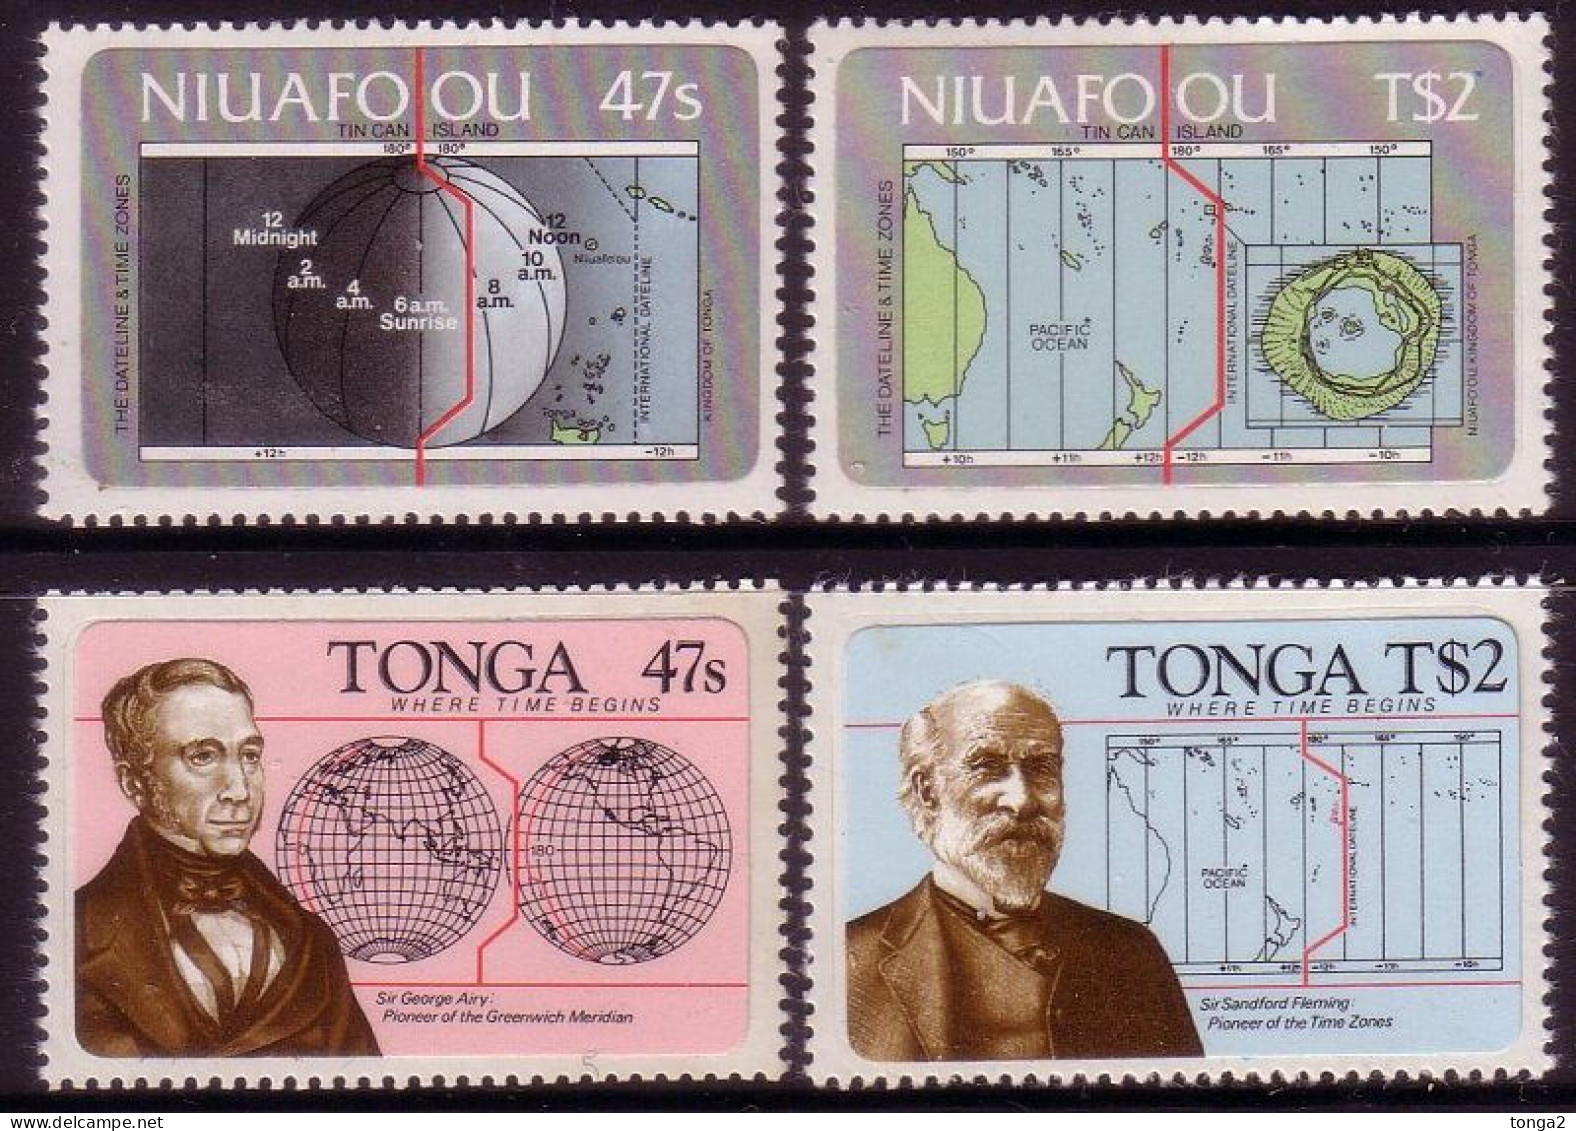 Tonga And Niuafo'ou 1984 Sets - Map, International Dateline, Time Zones - Geographie